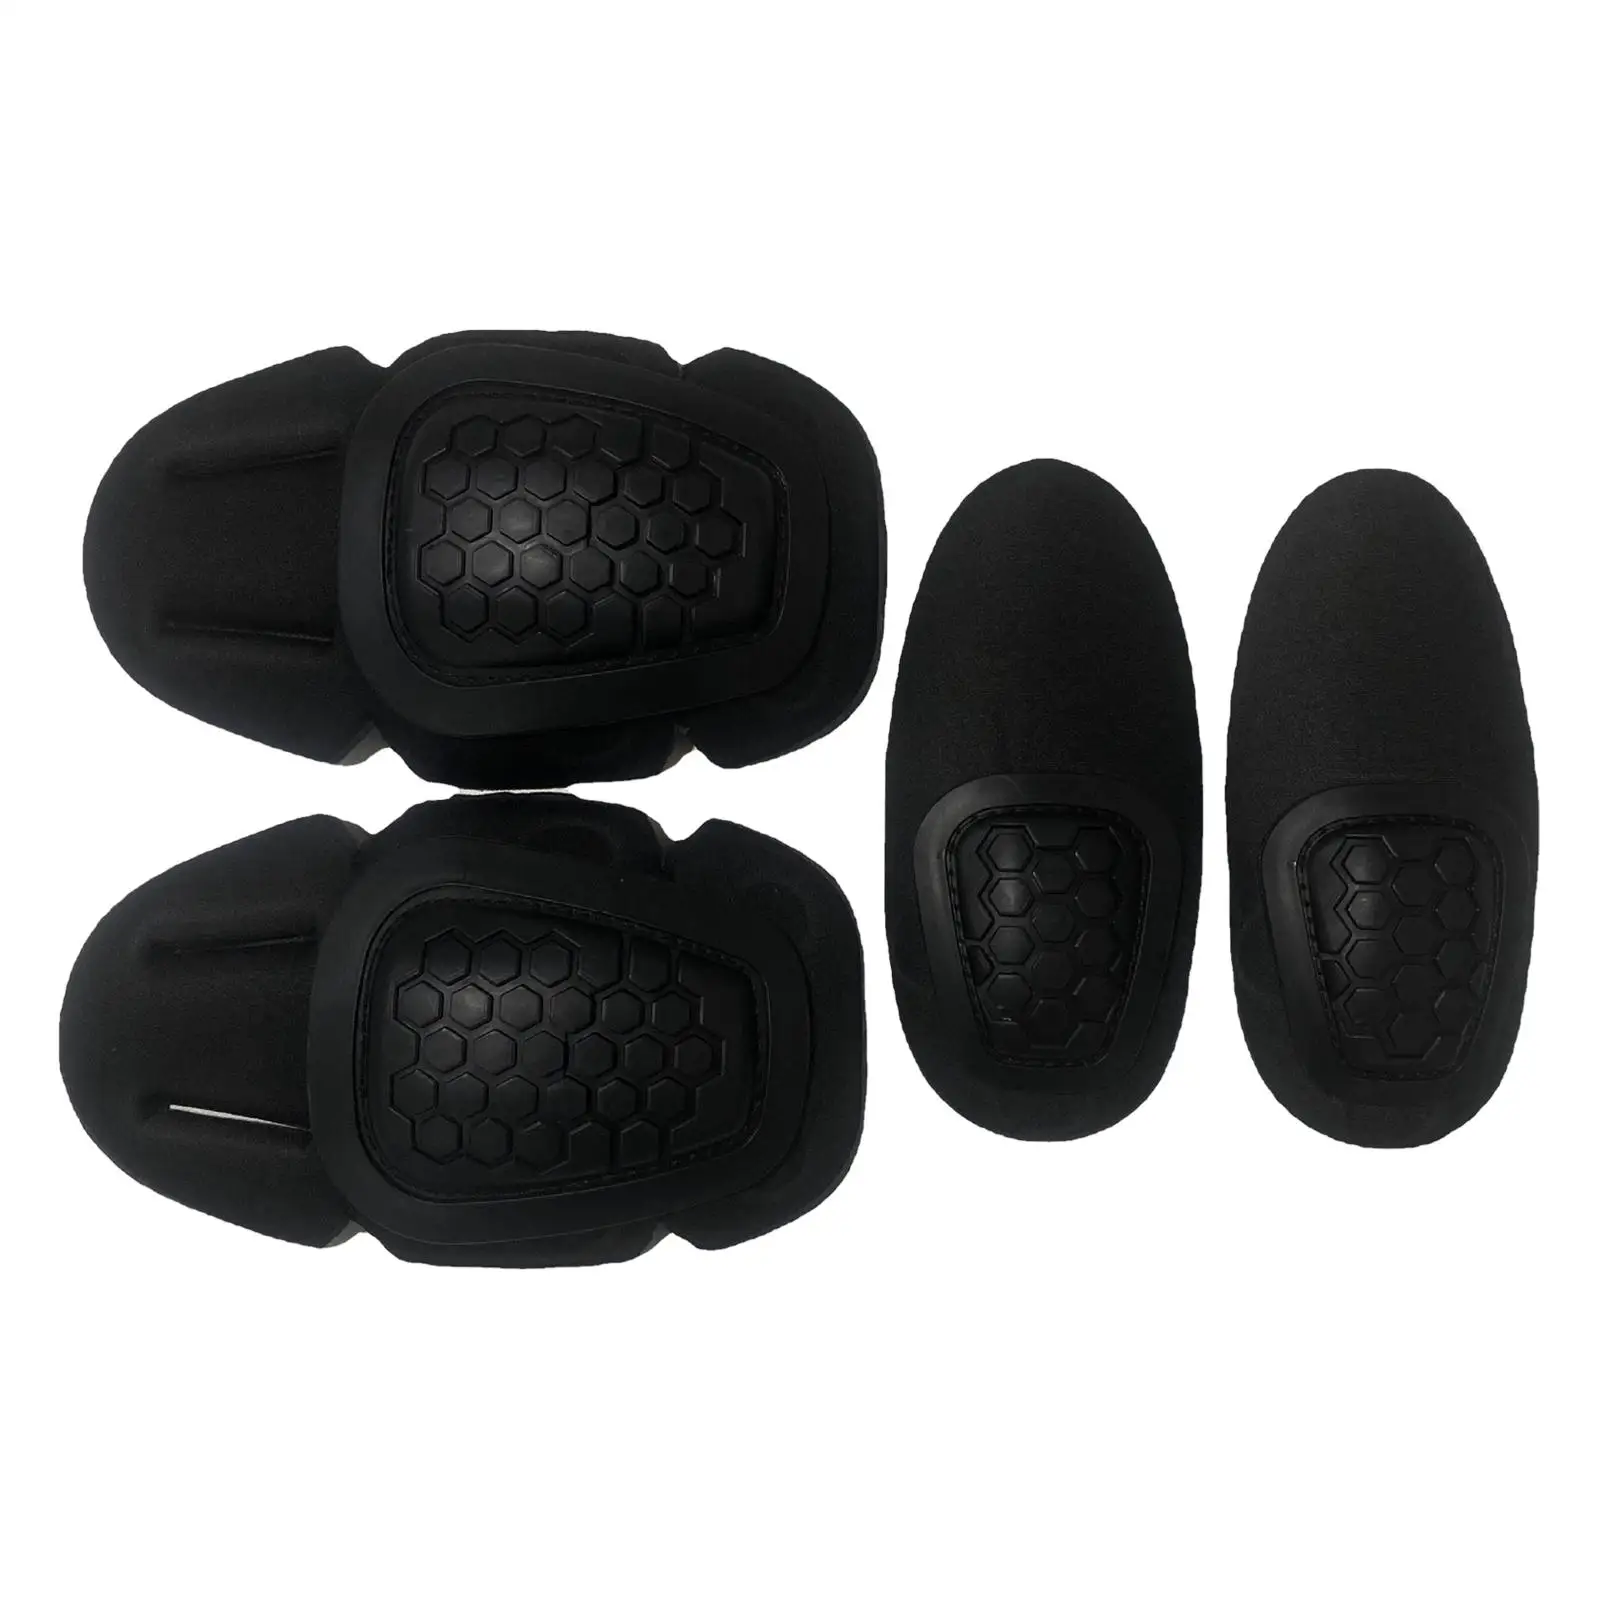 4 Pieces Knee Elbow Support Pads Shin Guards for Skating Rollerblading Bike